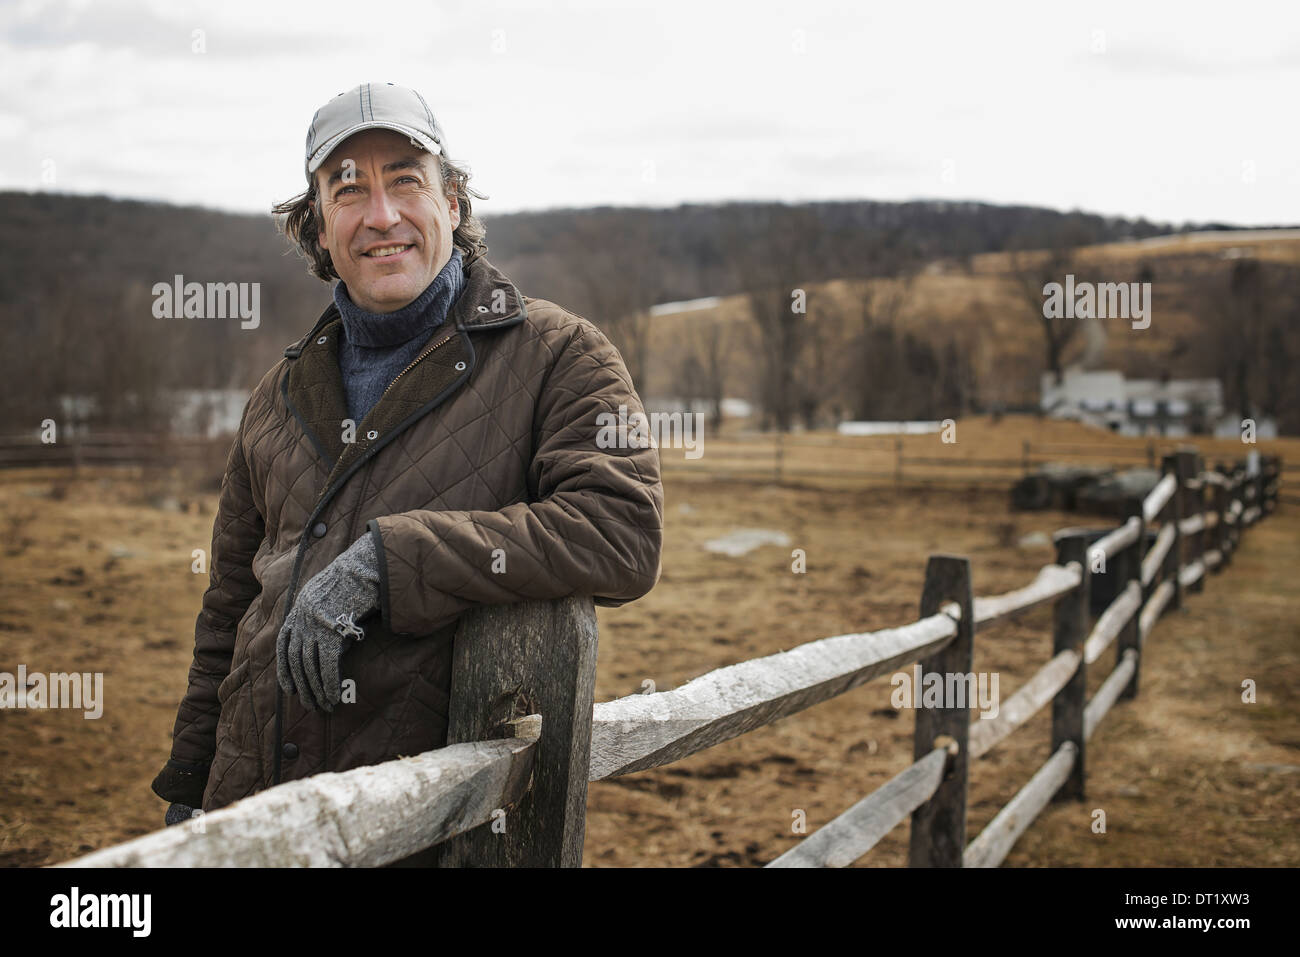 A man leaning against a post and rail fence on a farm in winter Stock Photo